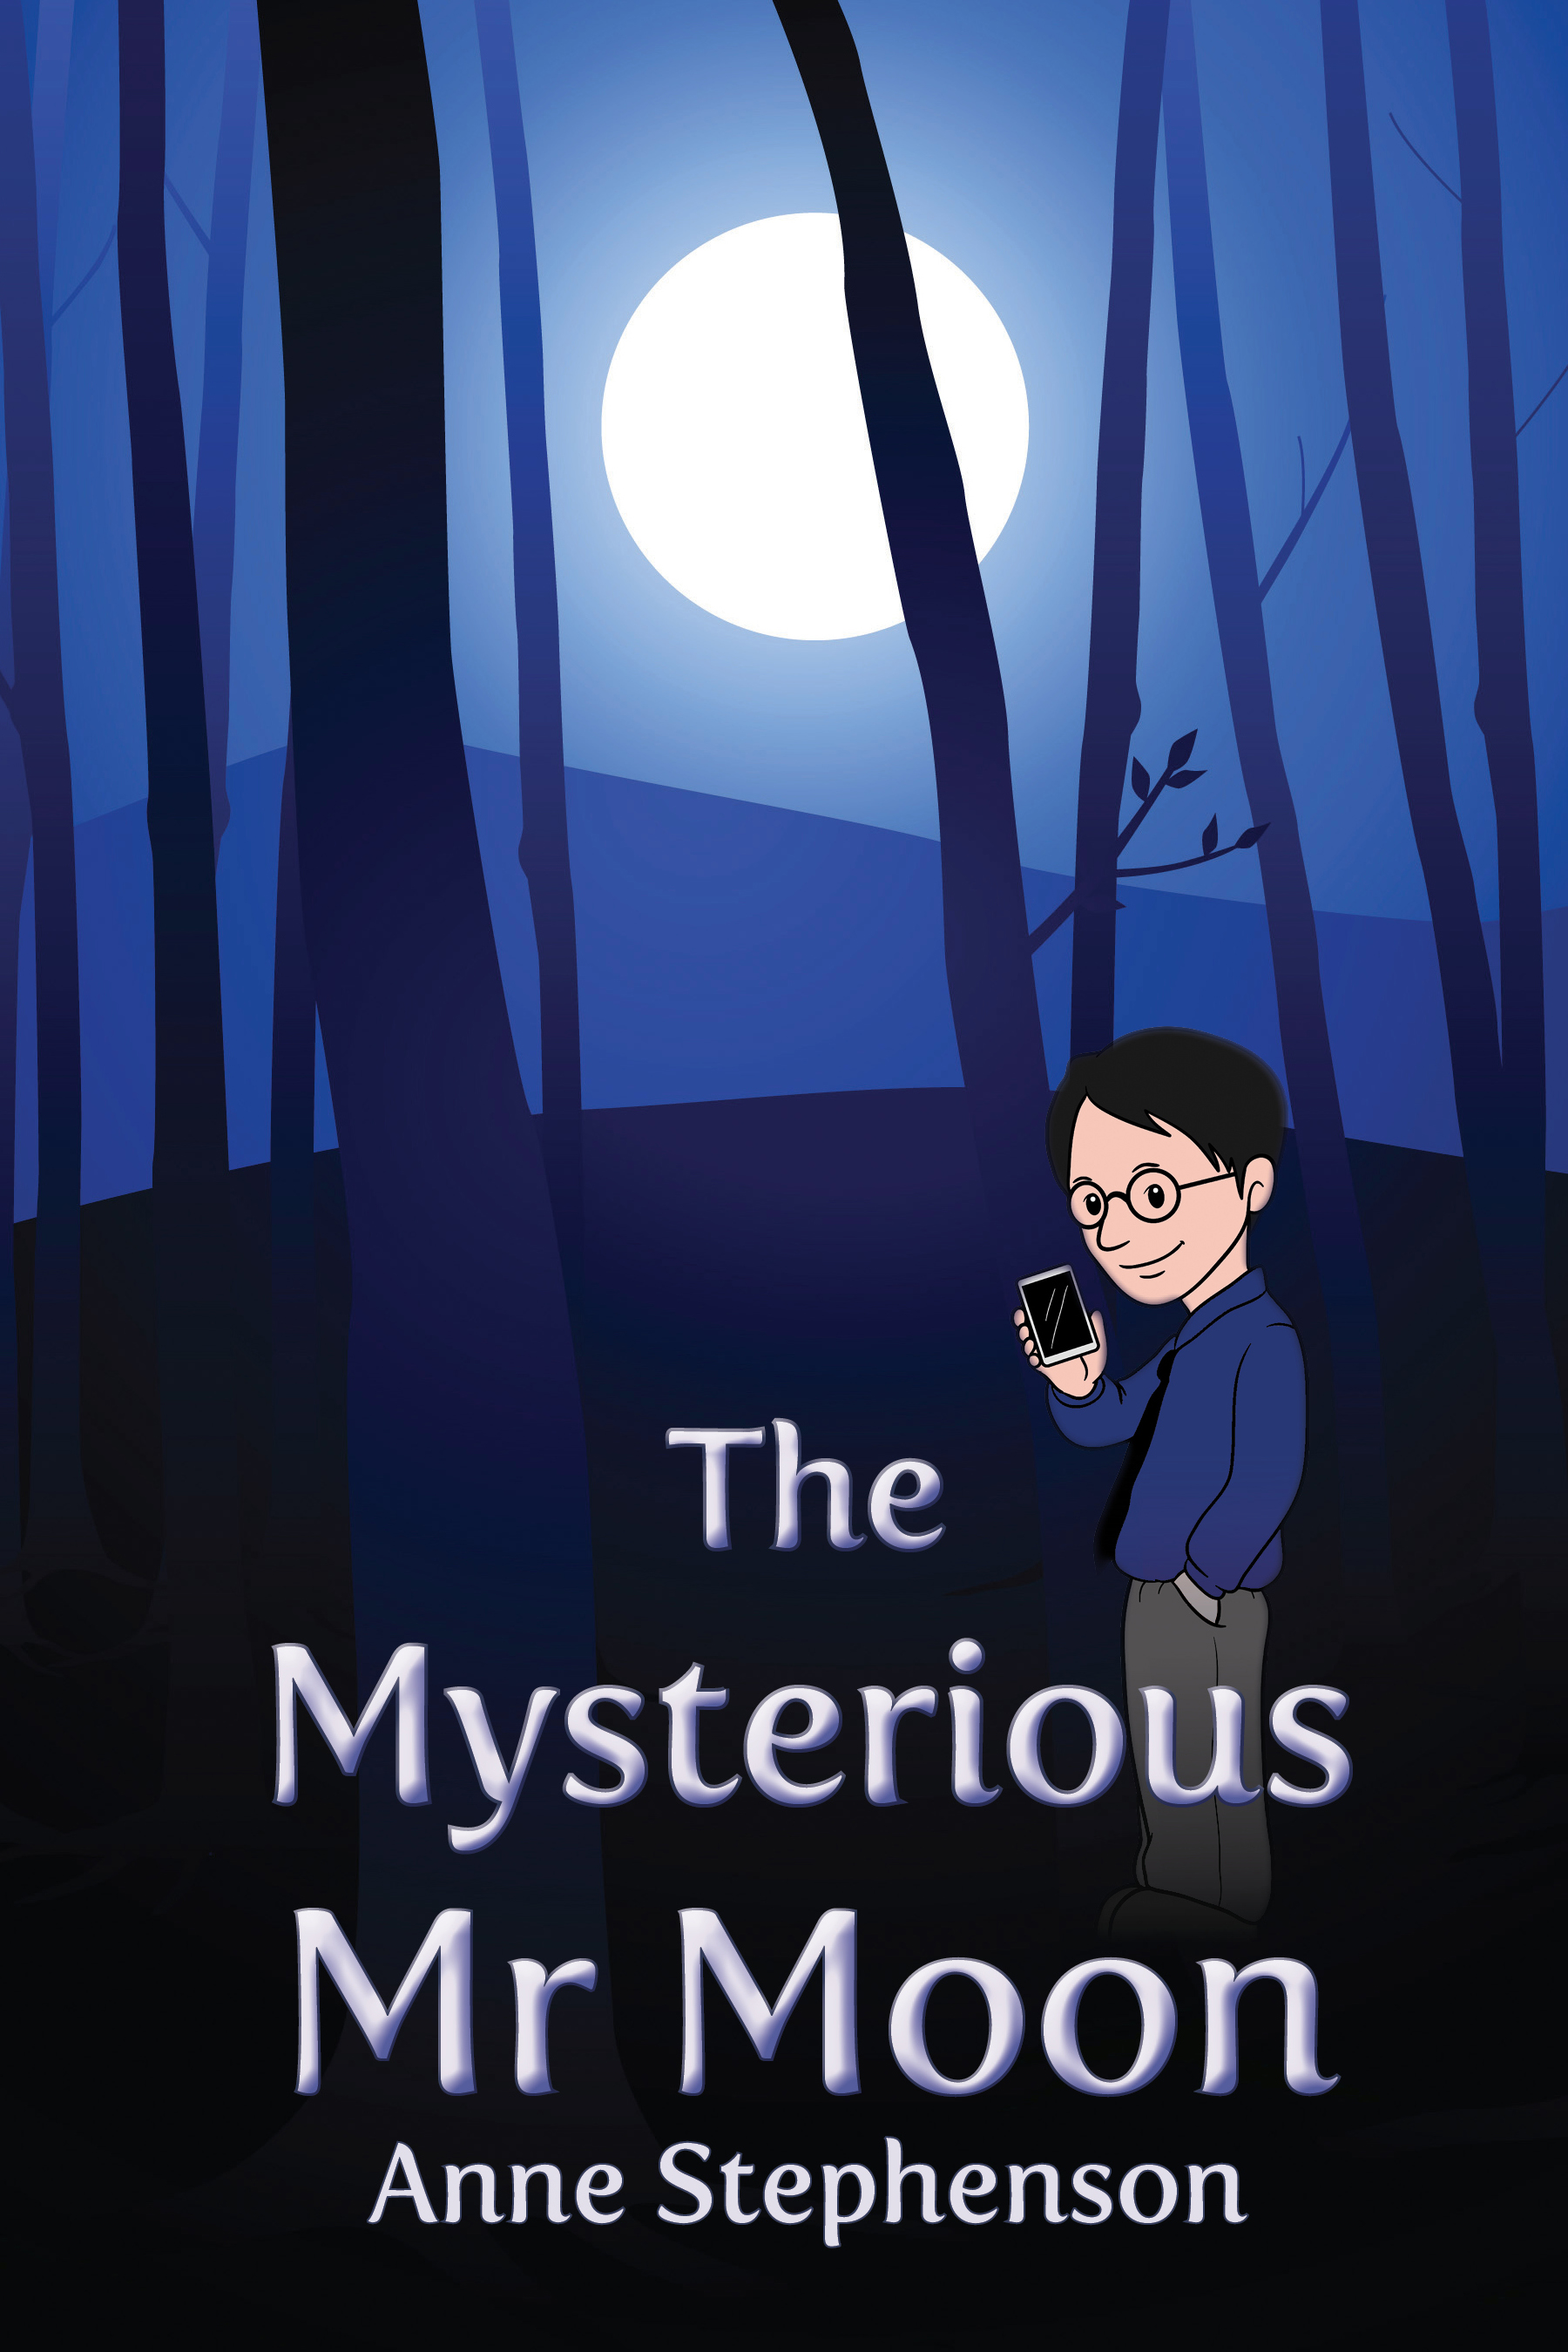 The Mysterious Mr Moon by Anne Stephenson